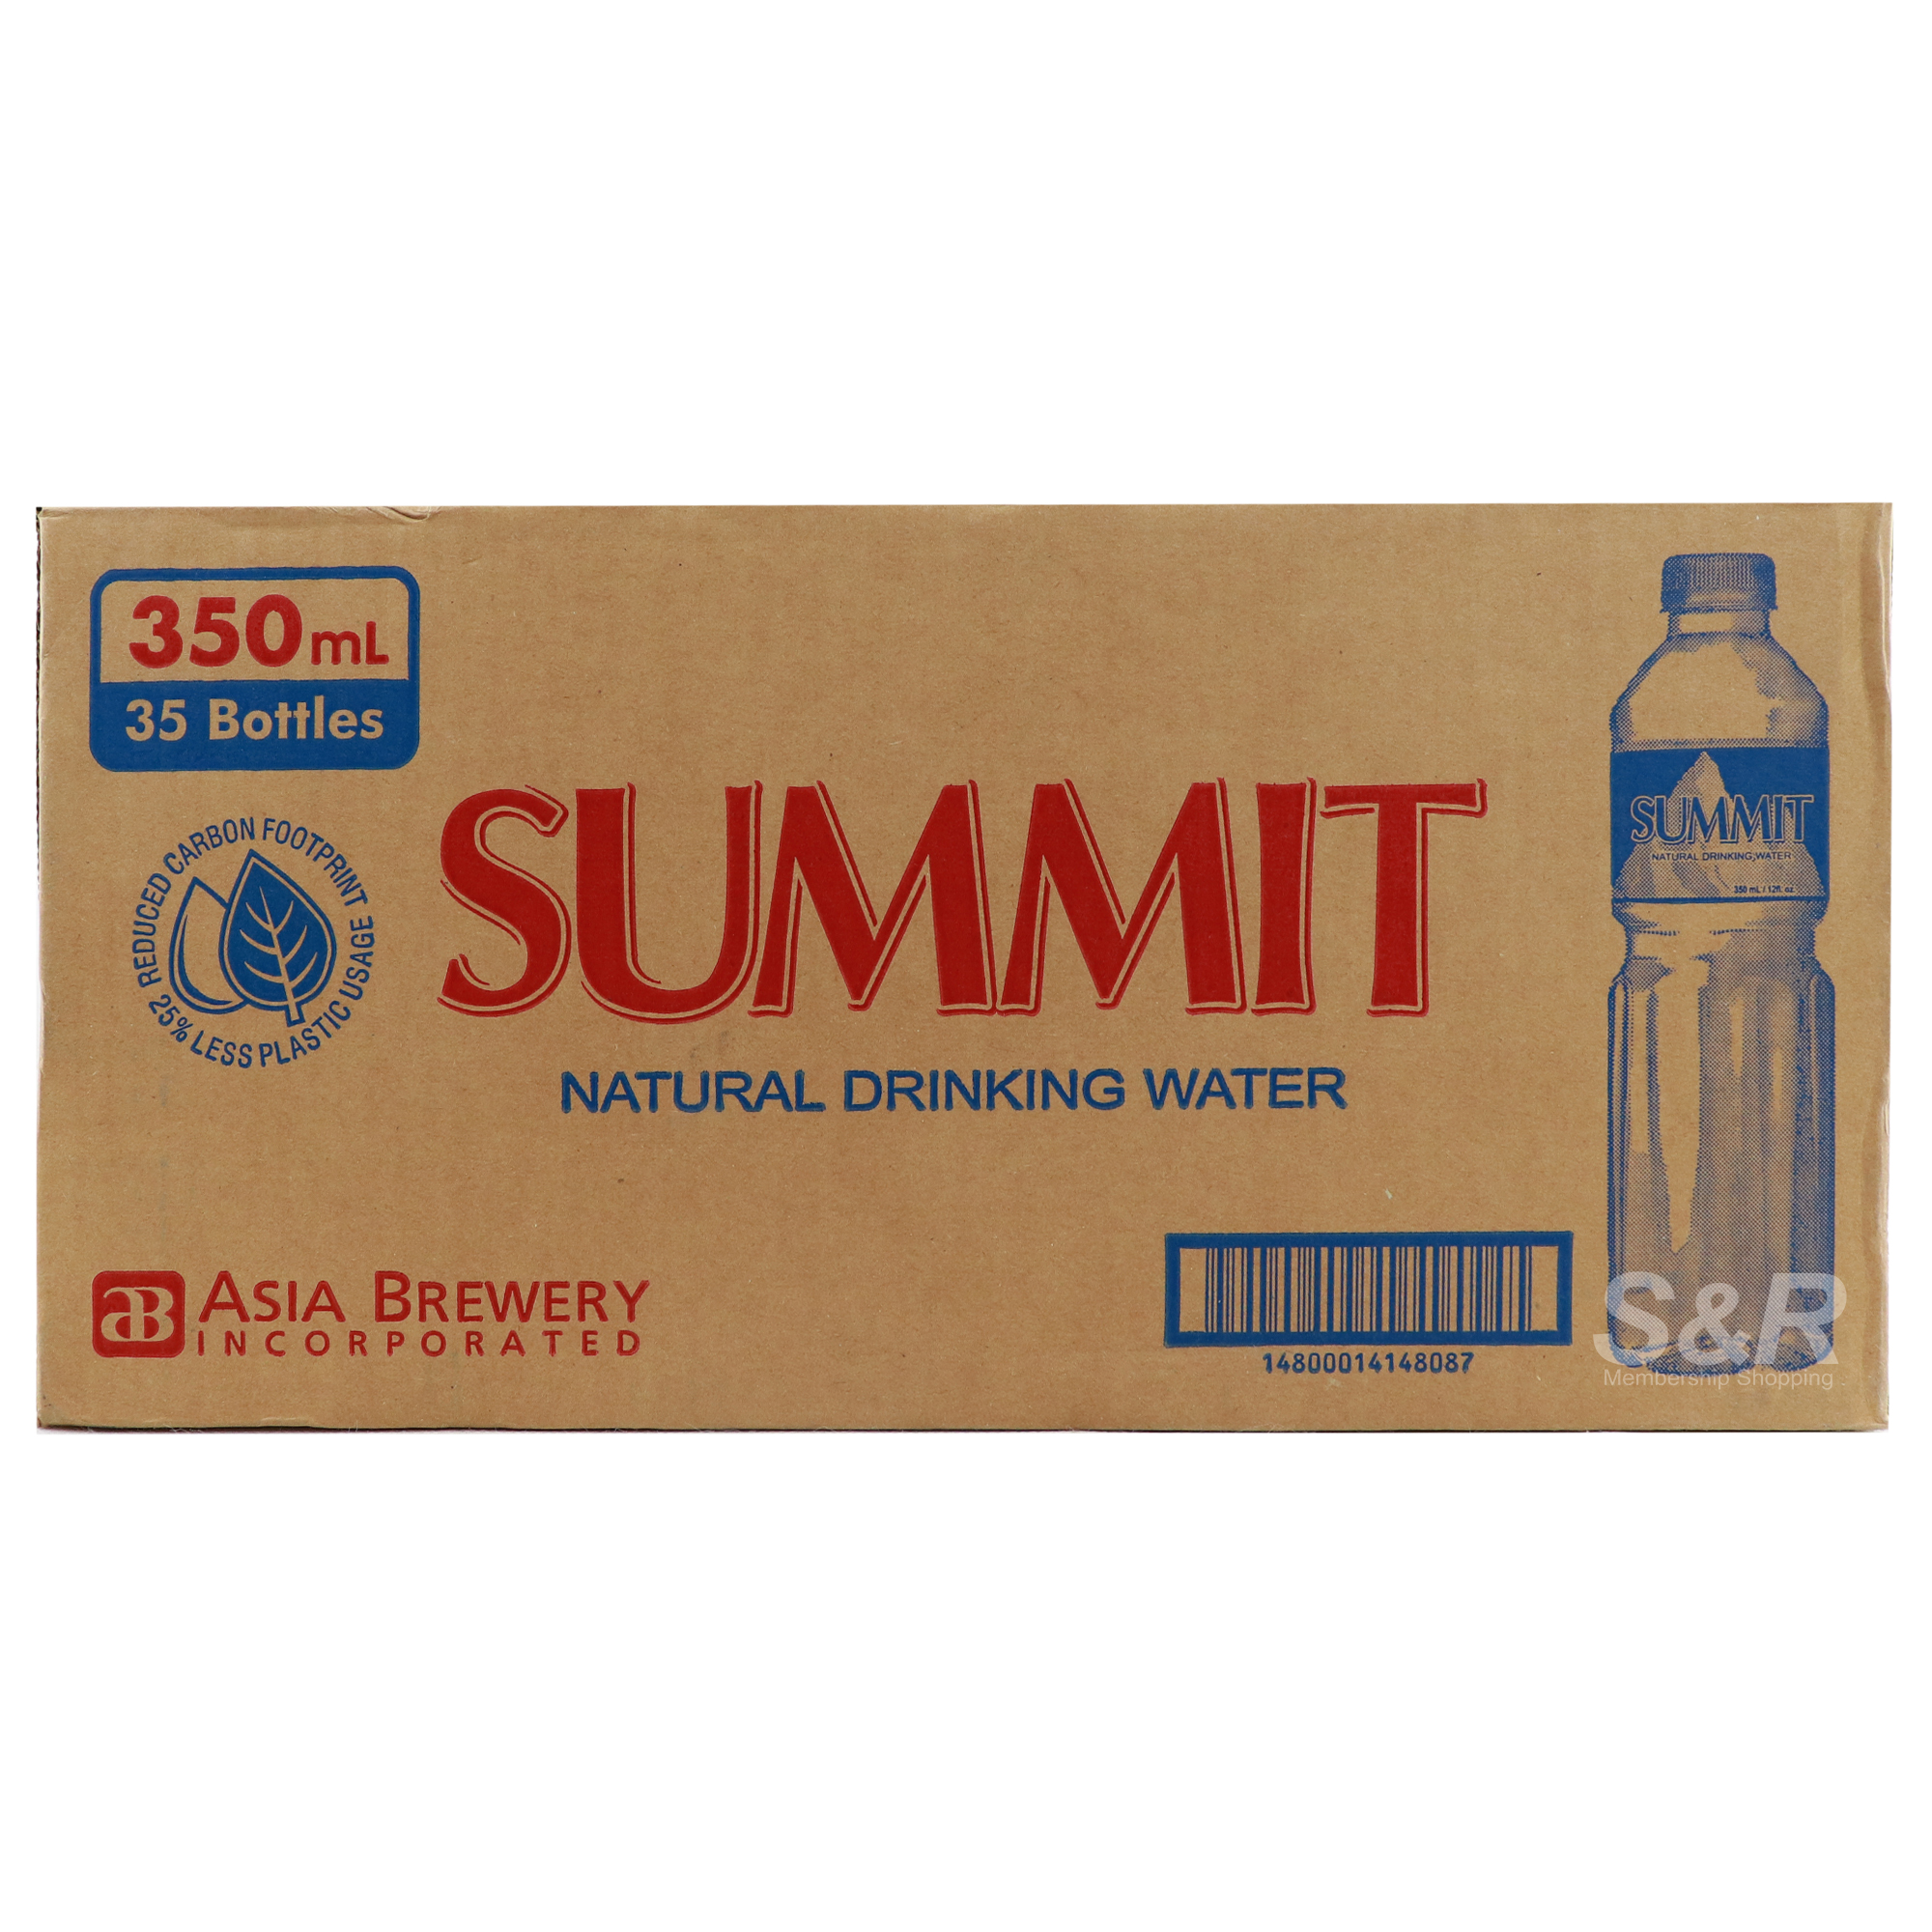 https://www.snrshopping.com/upload/product/Summit%20Natural%20Drinking%20Water%2035%20bottles-3161/Summit%20Natural%20Drinking%20Water%2035%20bottles-IP1vk3Ffwe.jpg